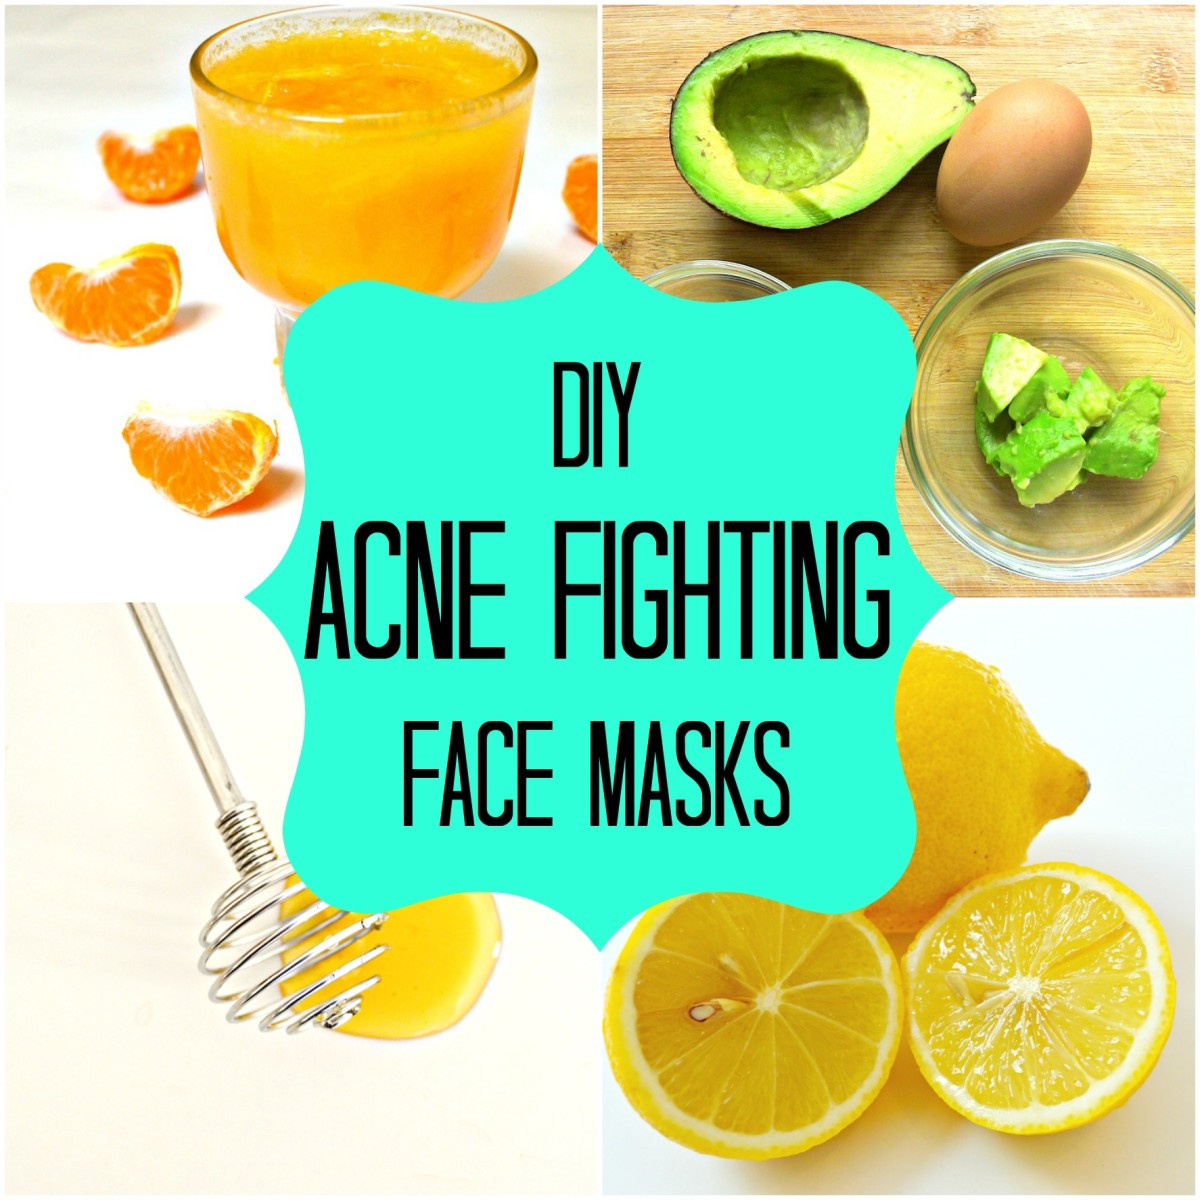 DIY Face Masks Acne
 DIY Homemade Face Masks for Acne How to Stop Pimples